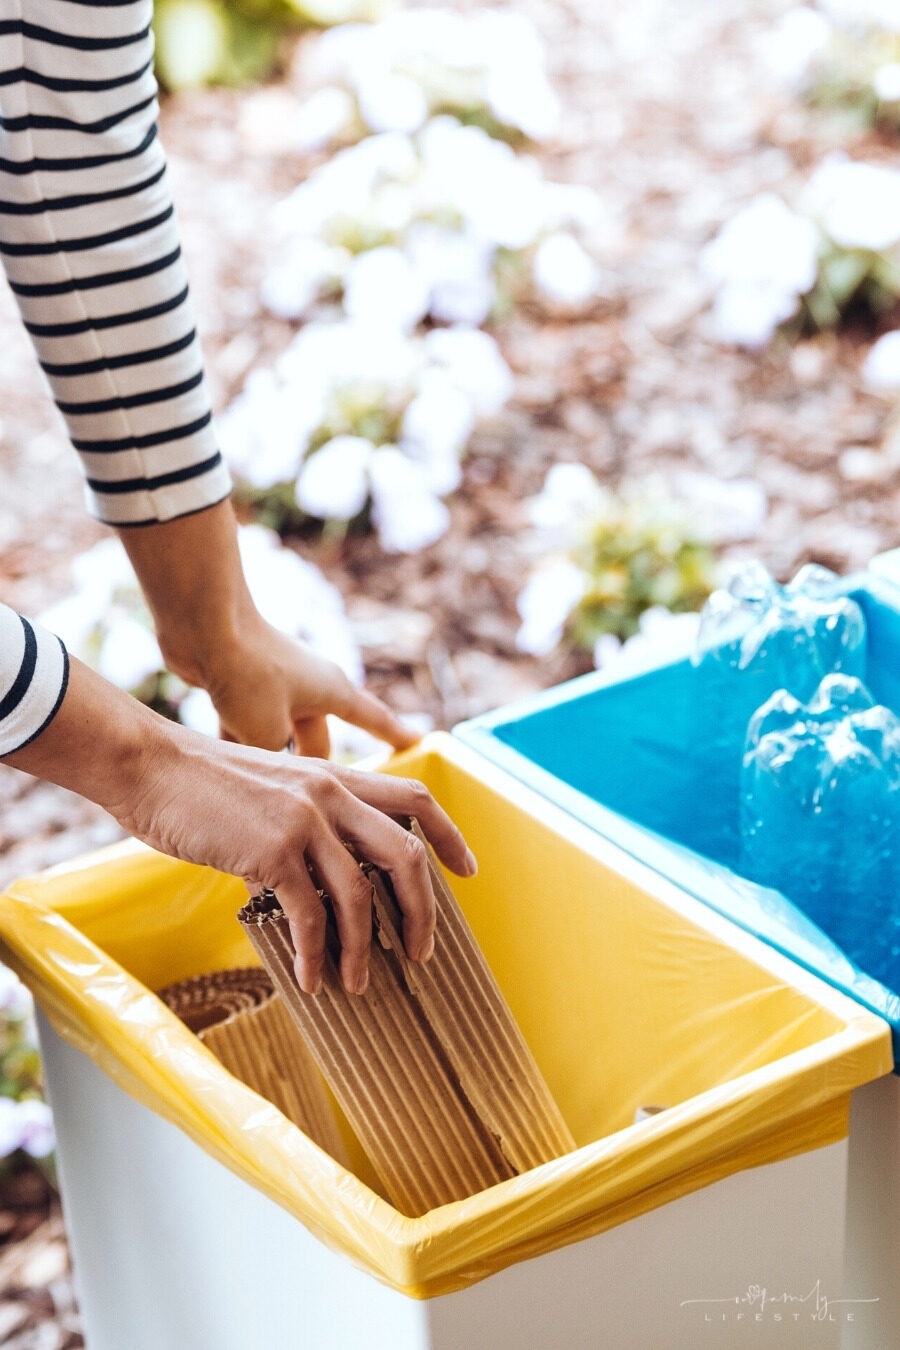 How To Cut Down On Your Annual Household Waste Generation